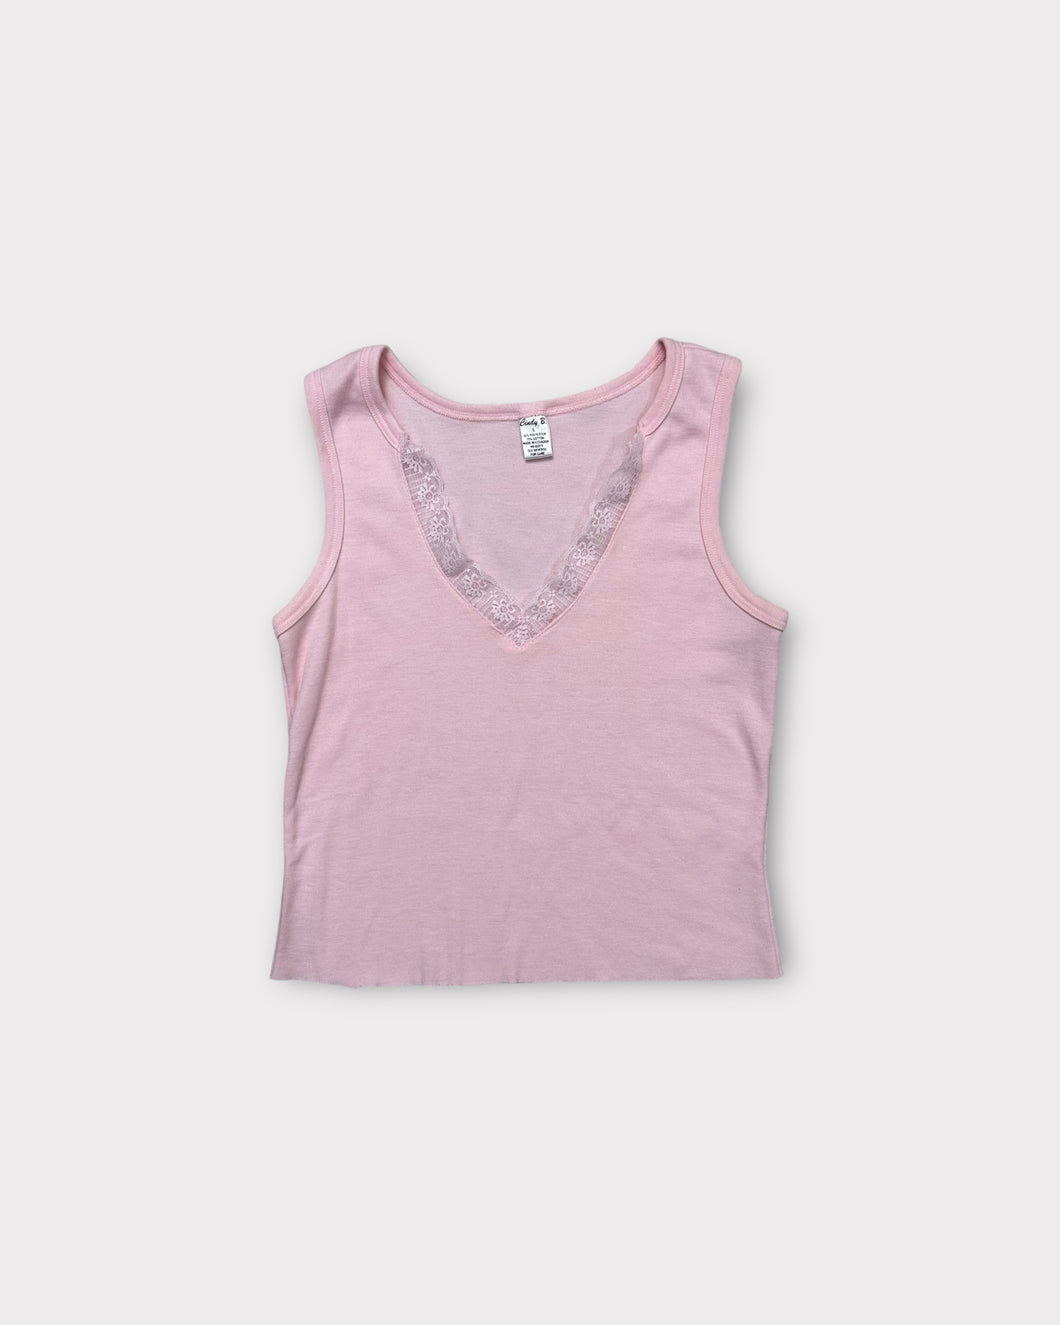 Cindy B Pink Y2K Cropped Tank with Lace Trim (L)